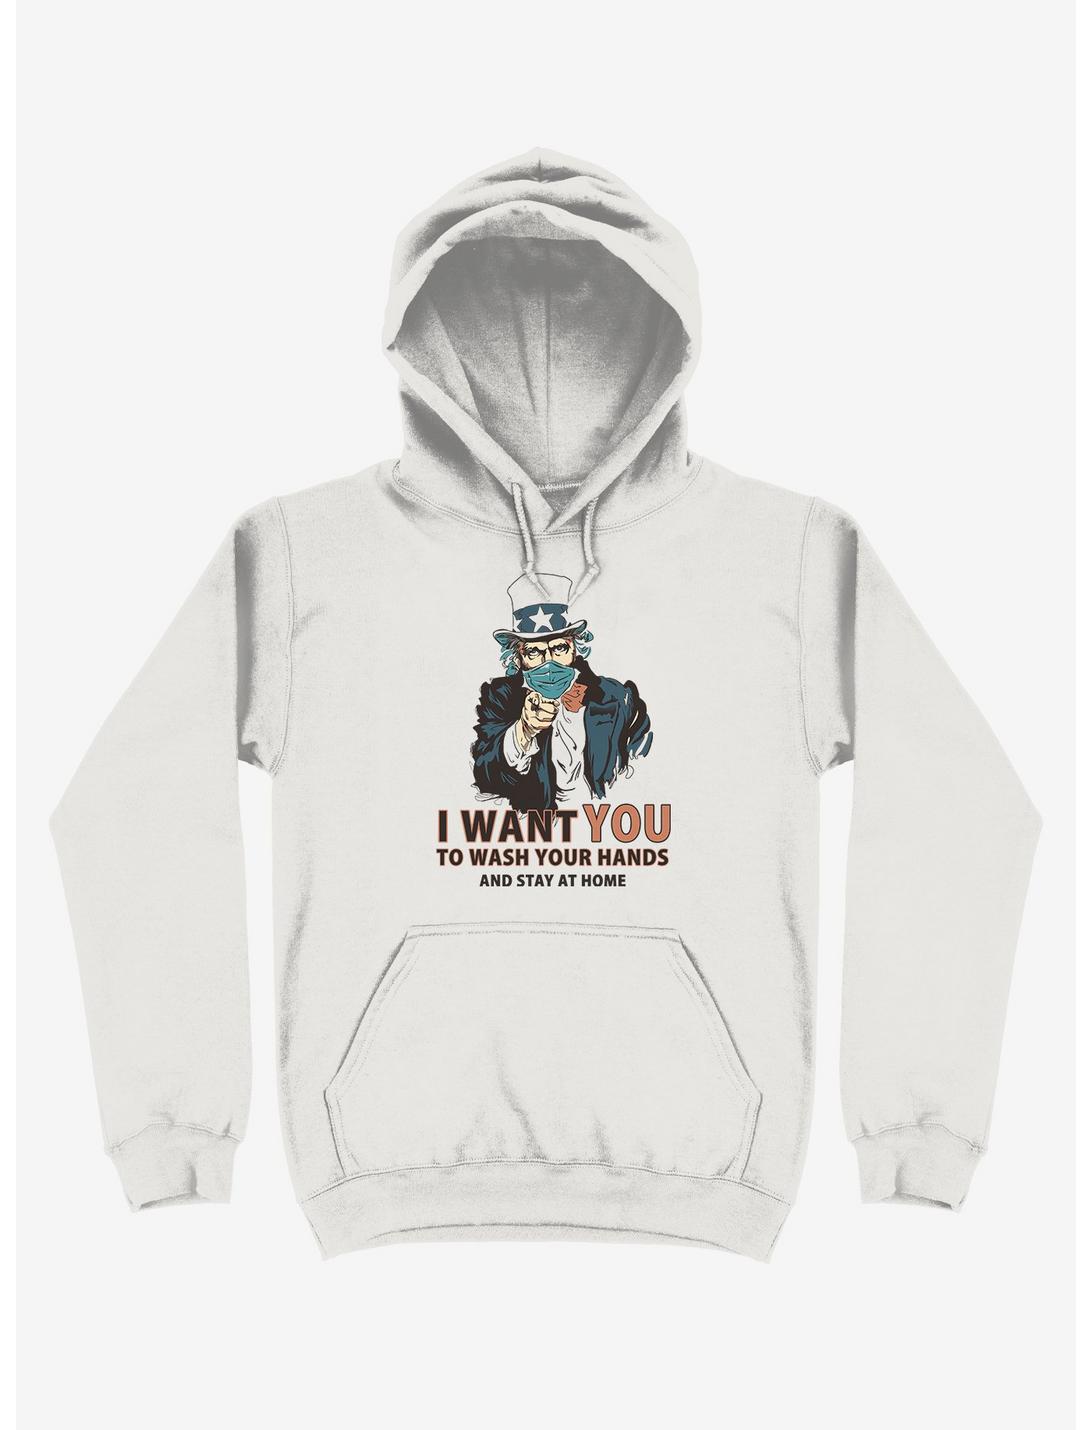 Wash Your Hands! Mask Uncle Sam White Hoodie, WHITE, hi-res